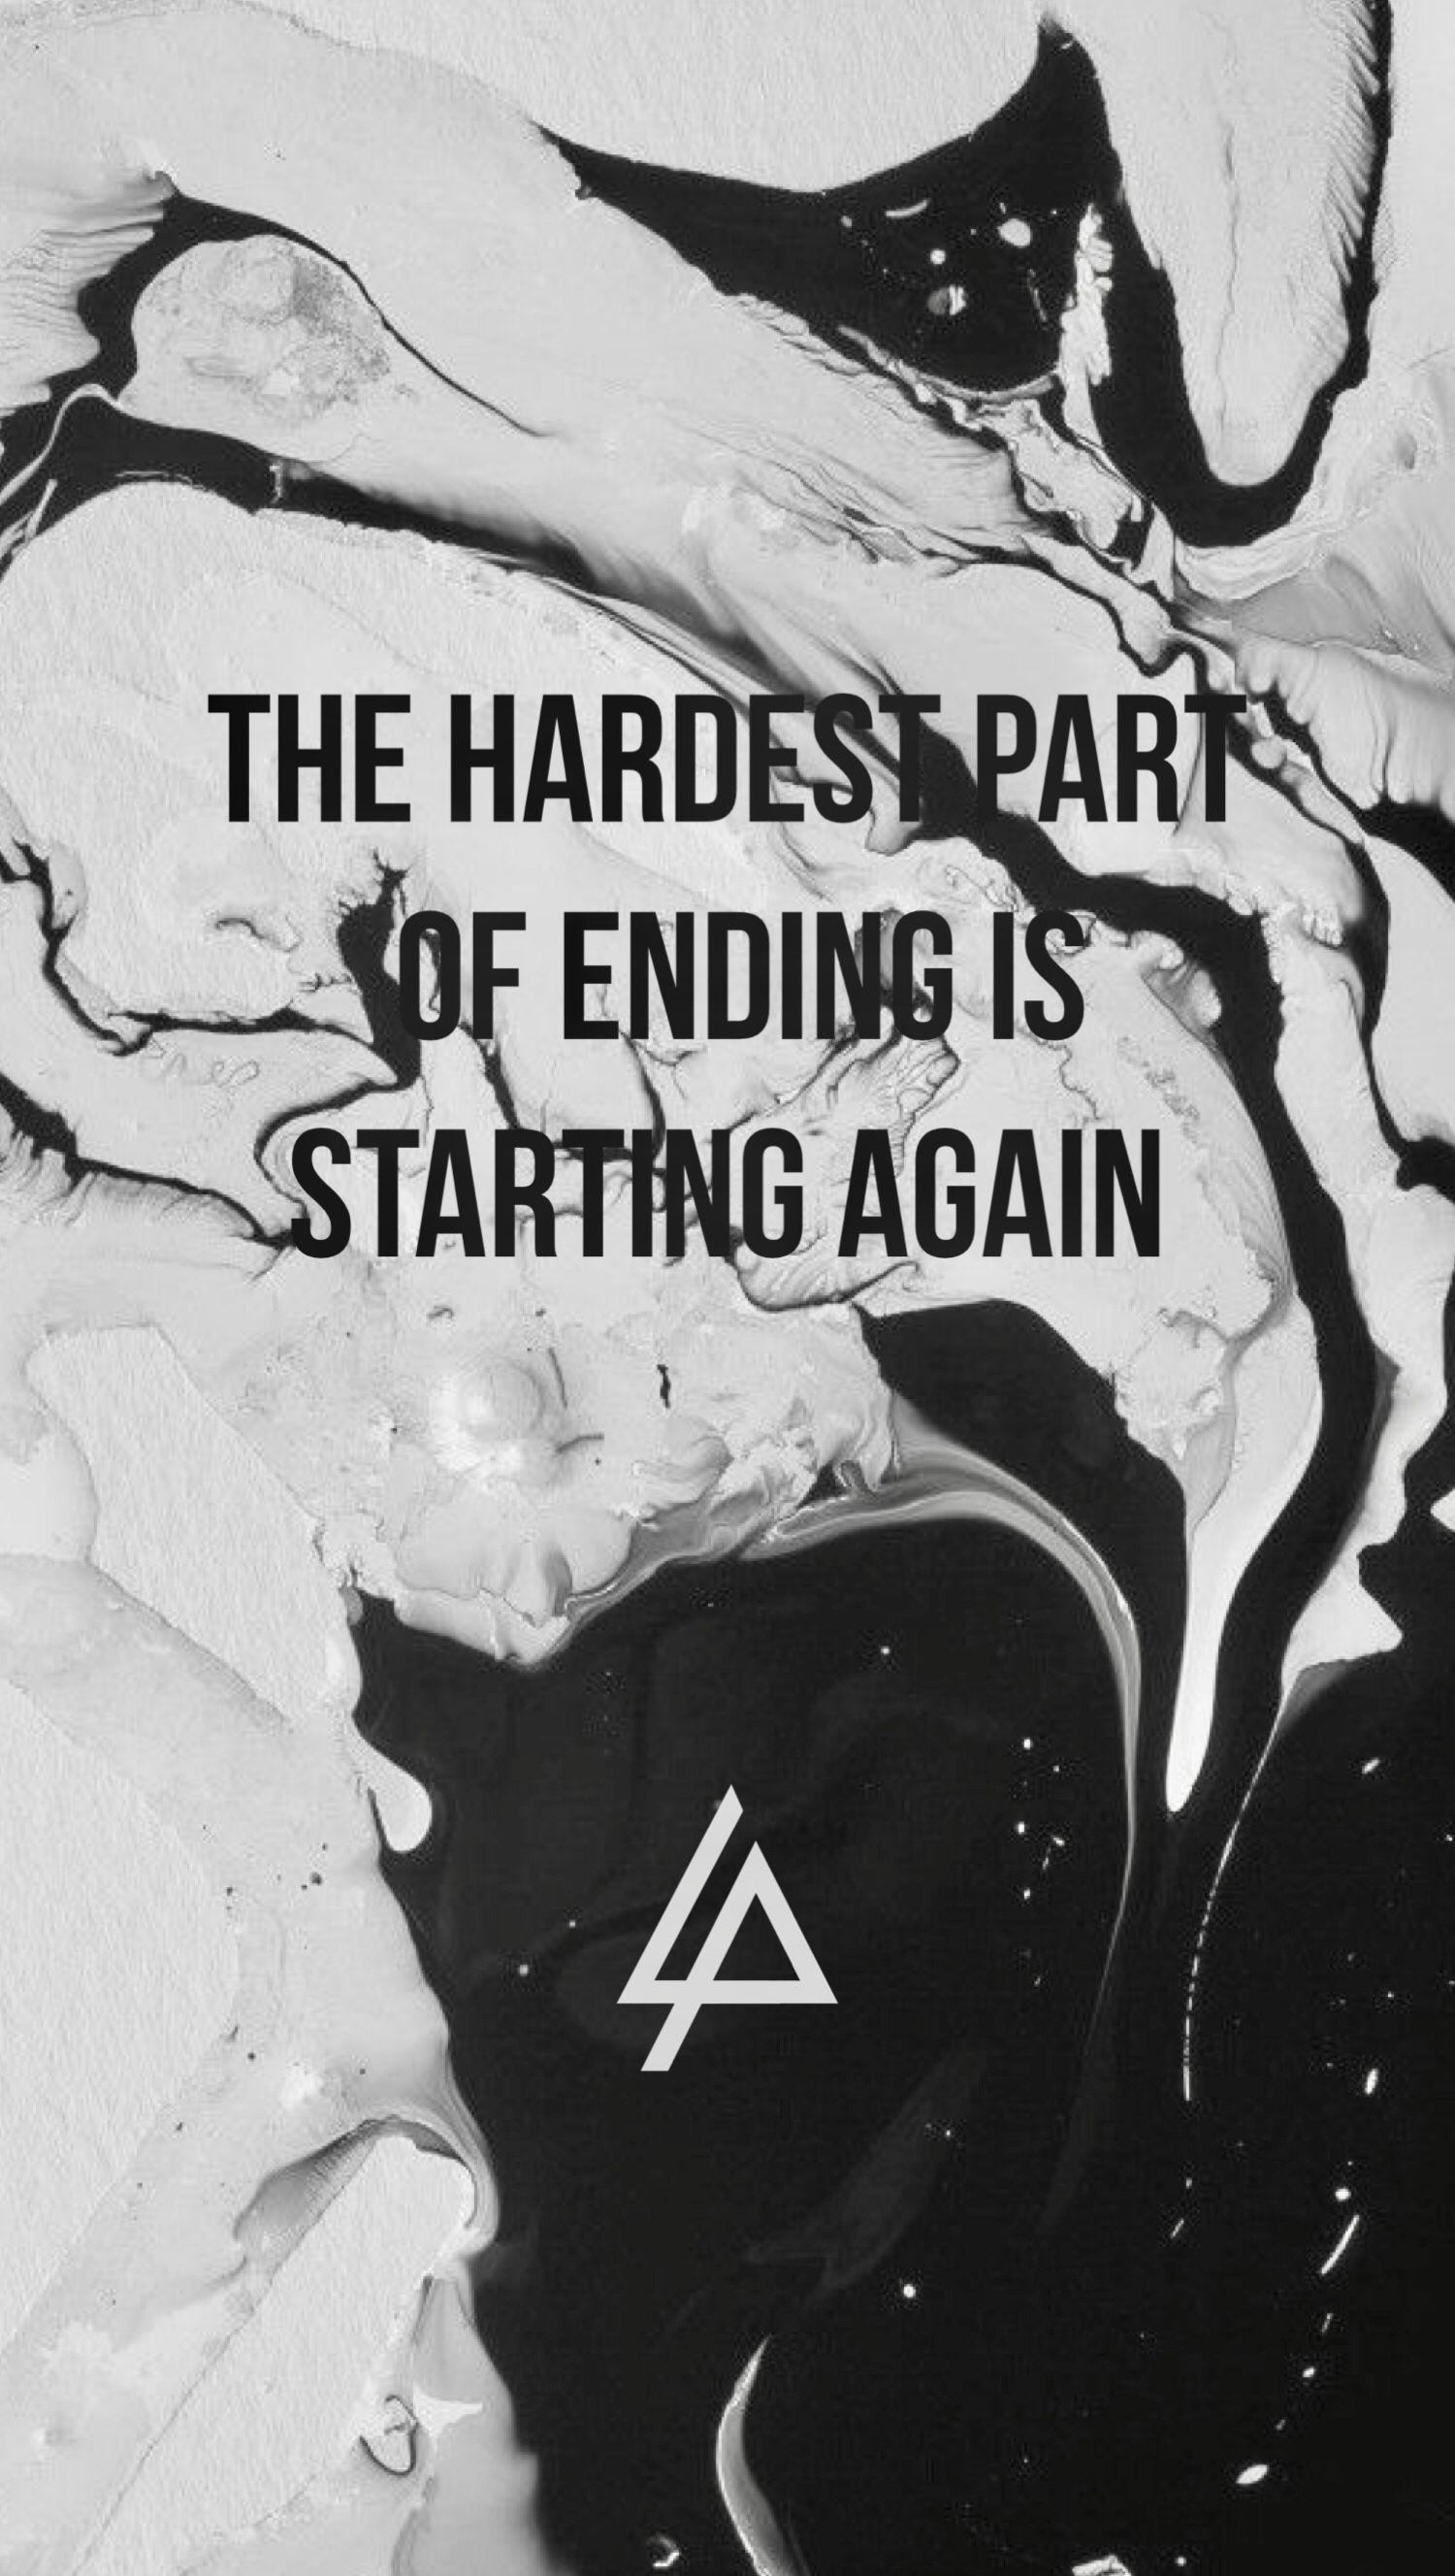 Waiting For The End Thousand Suns [Linkin Park]. Save